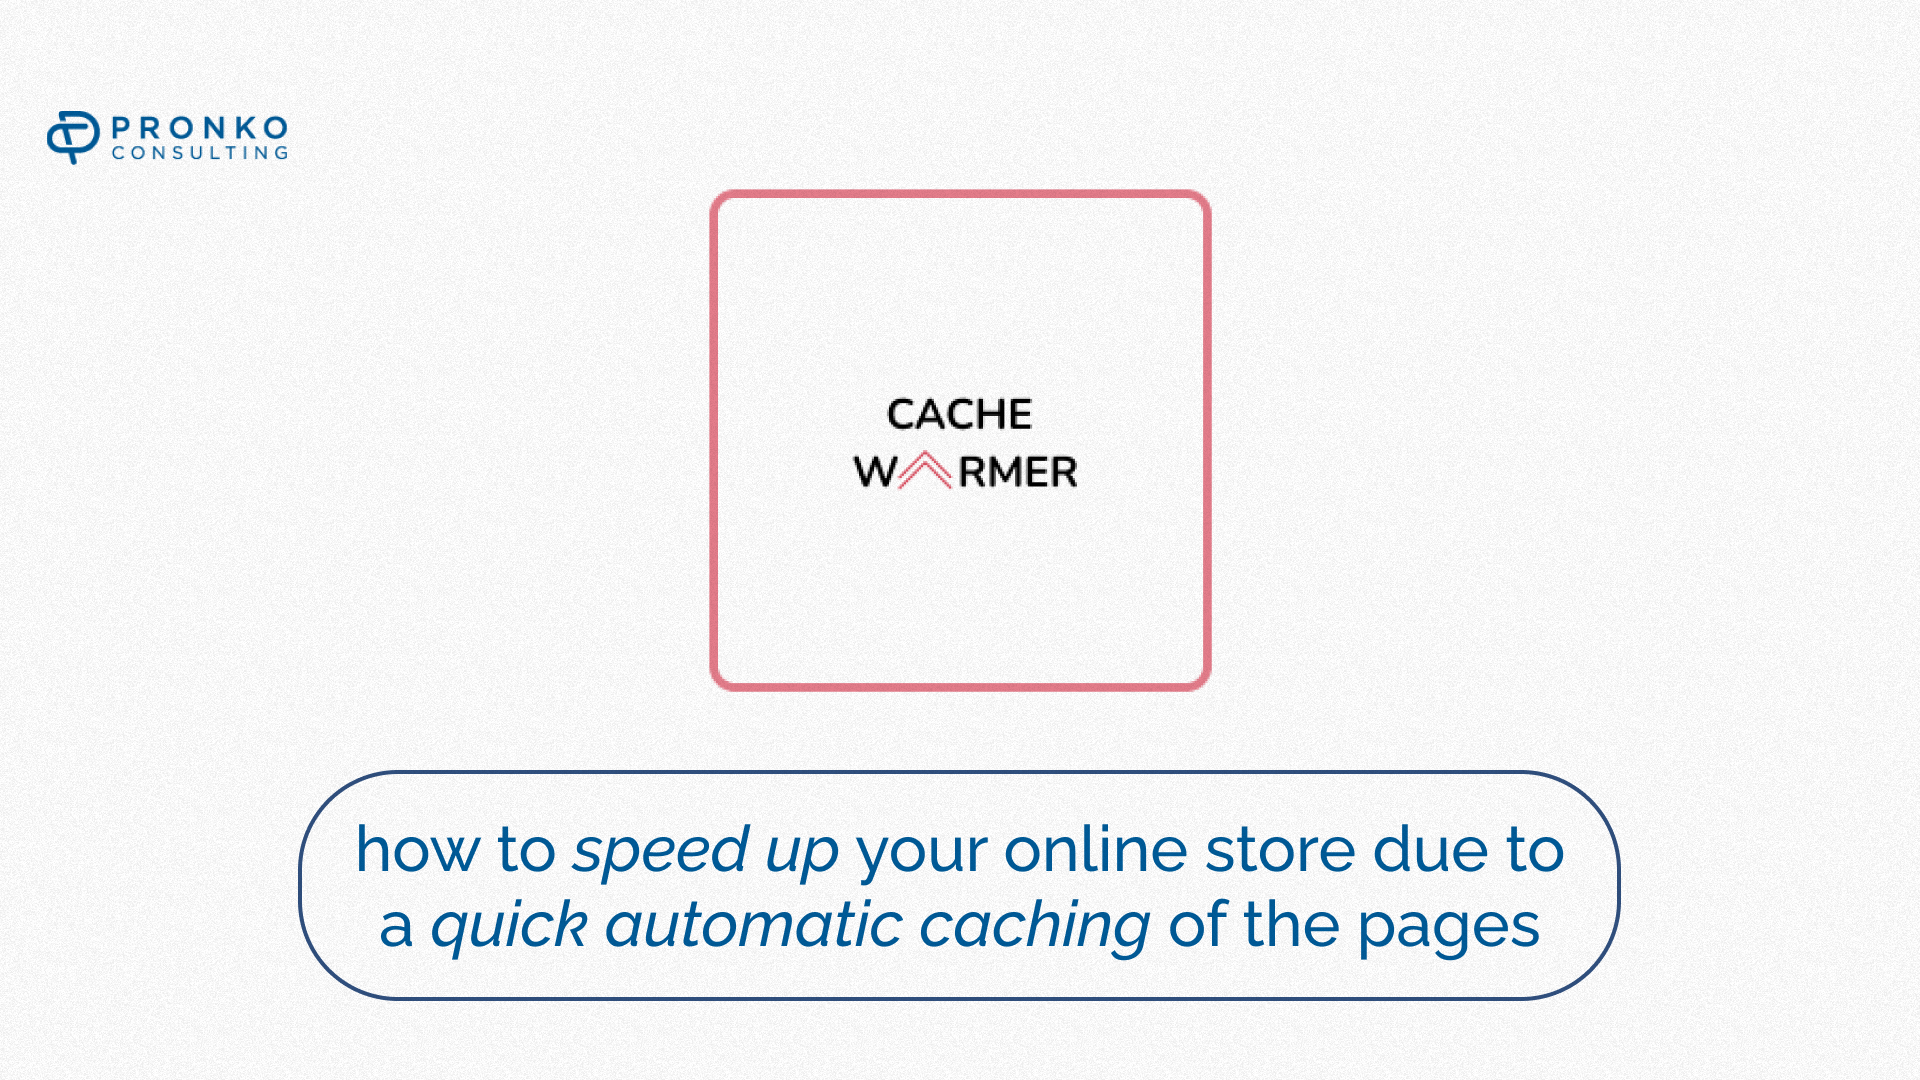 How quick caching can speed up the website?